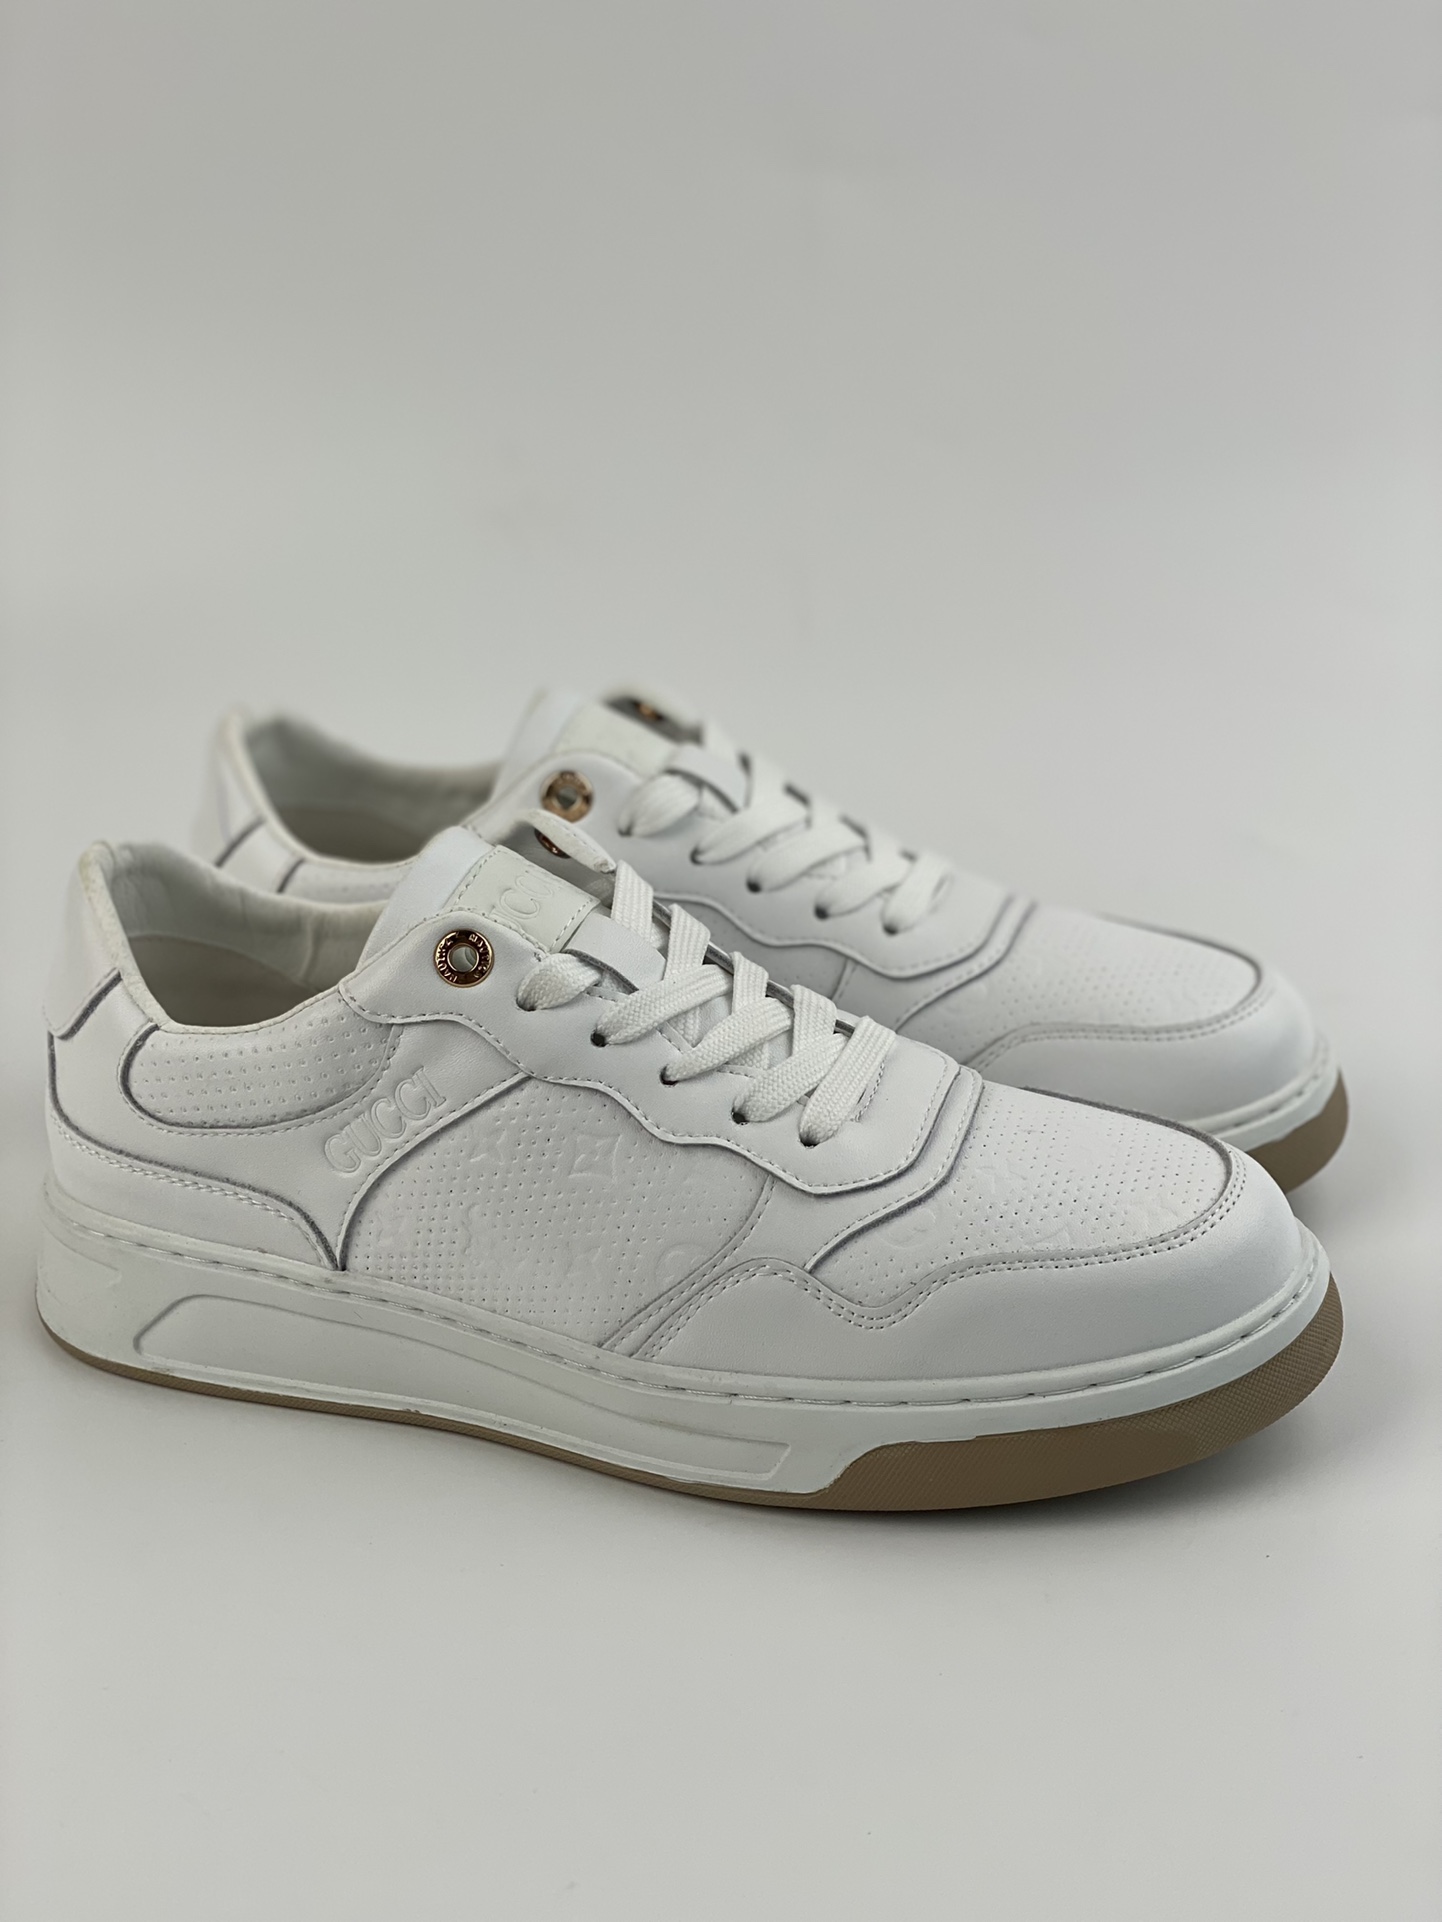 Overseas version of Gucci Gucci Sports Leisure Trend Sneakers Series